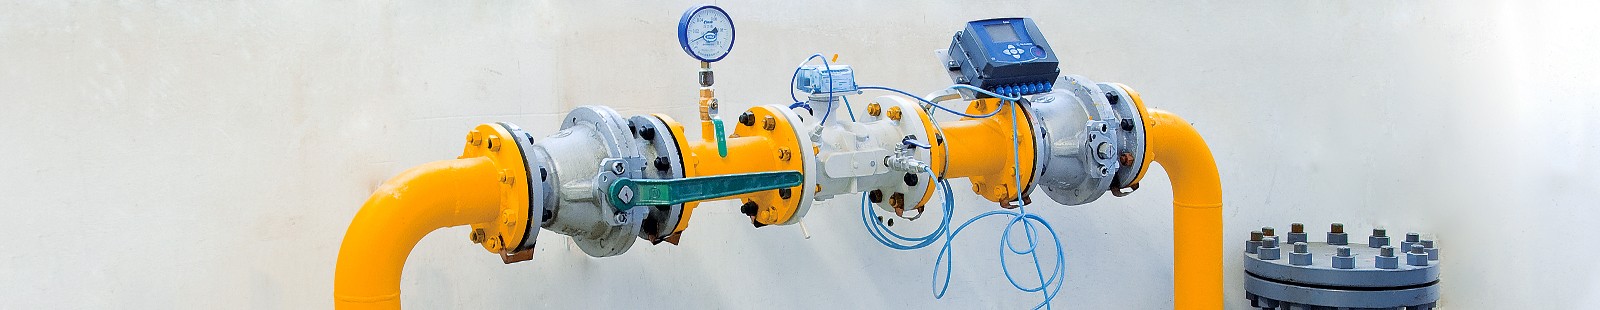 industrial gas piping valves and gas meters